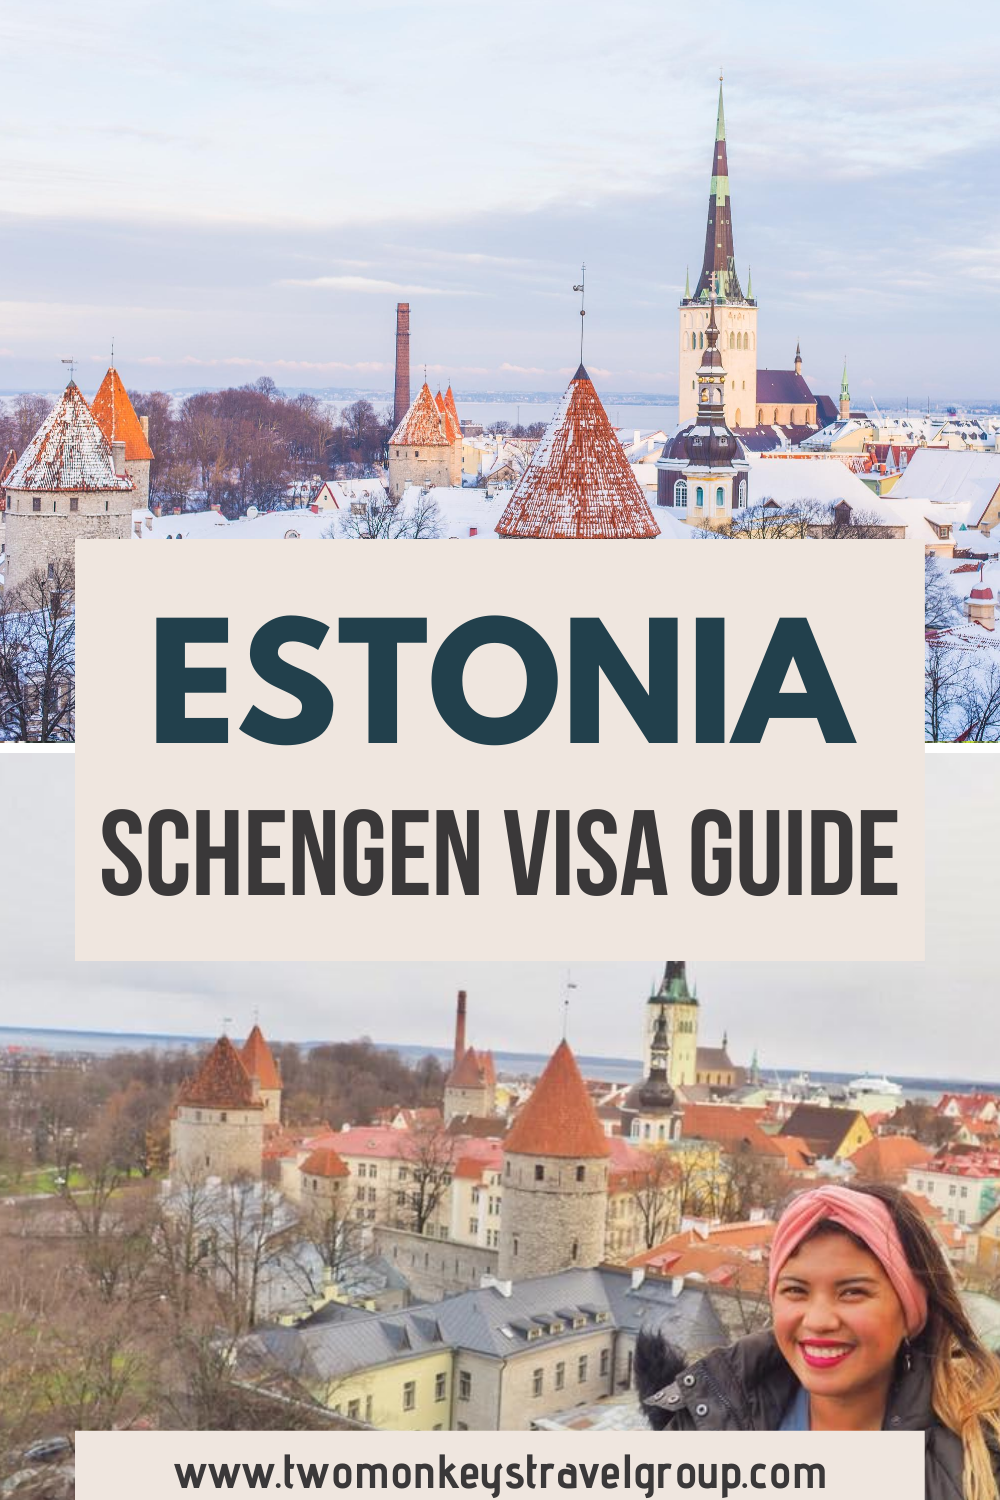 How To Apply For A Estonia Schengen Visa For Philippine Passport Holders [Estonia Schengen Visa Guide For Filipinos]